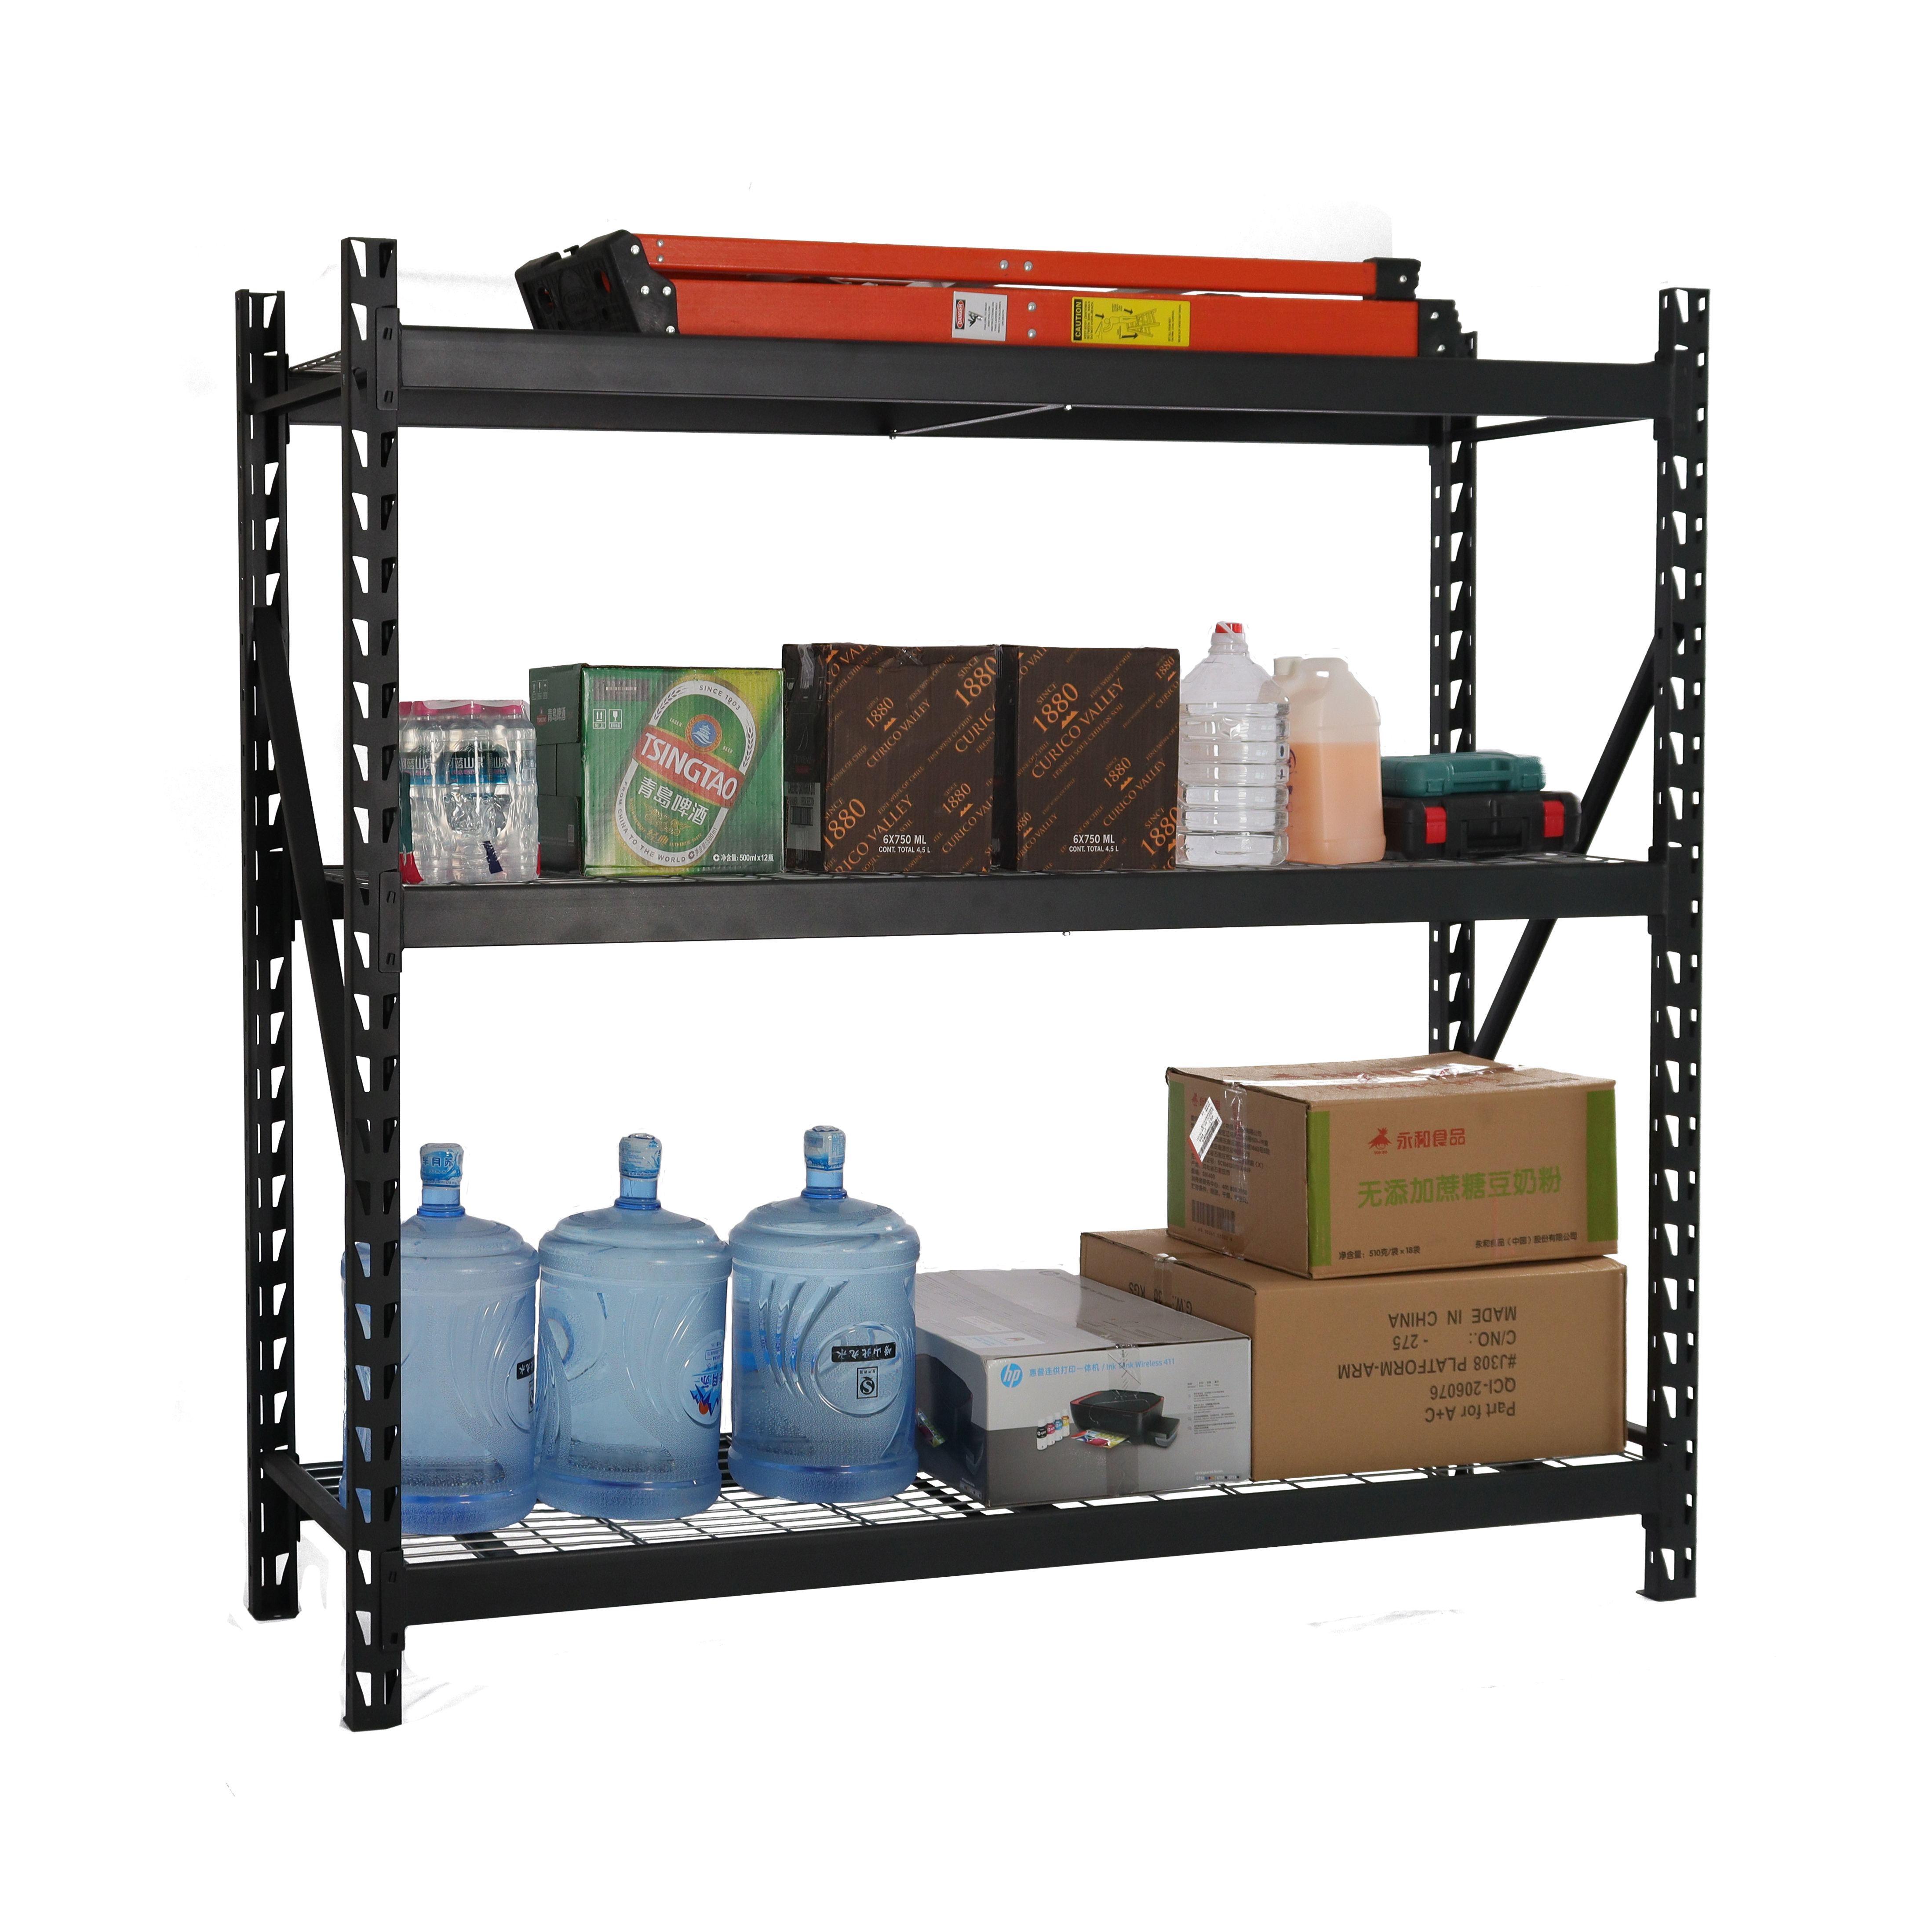 Use and classification of heavy duty shelves